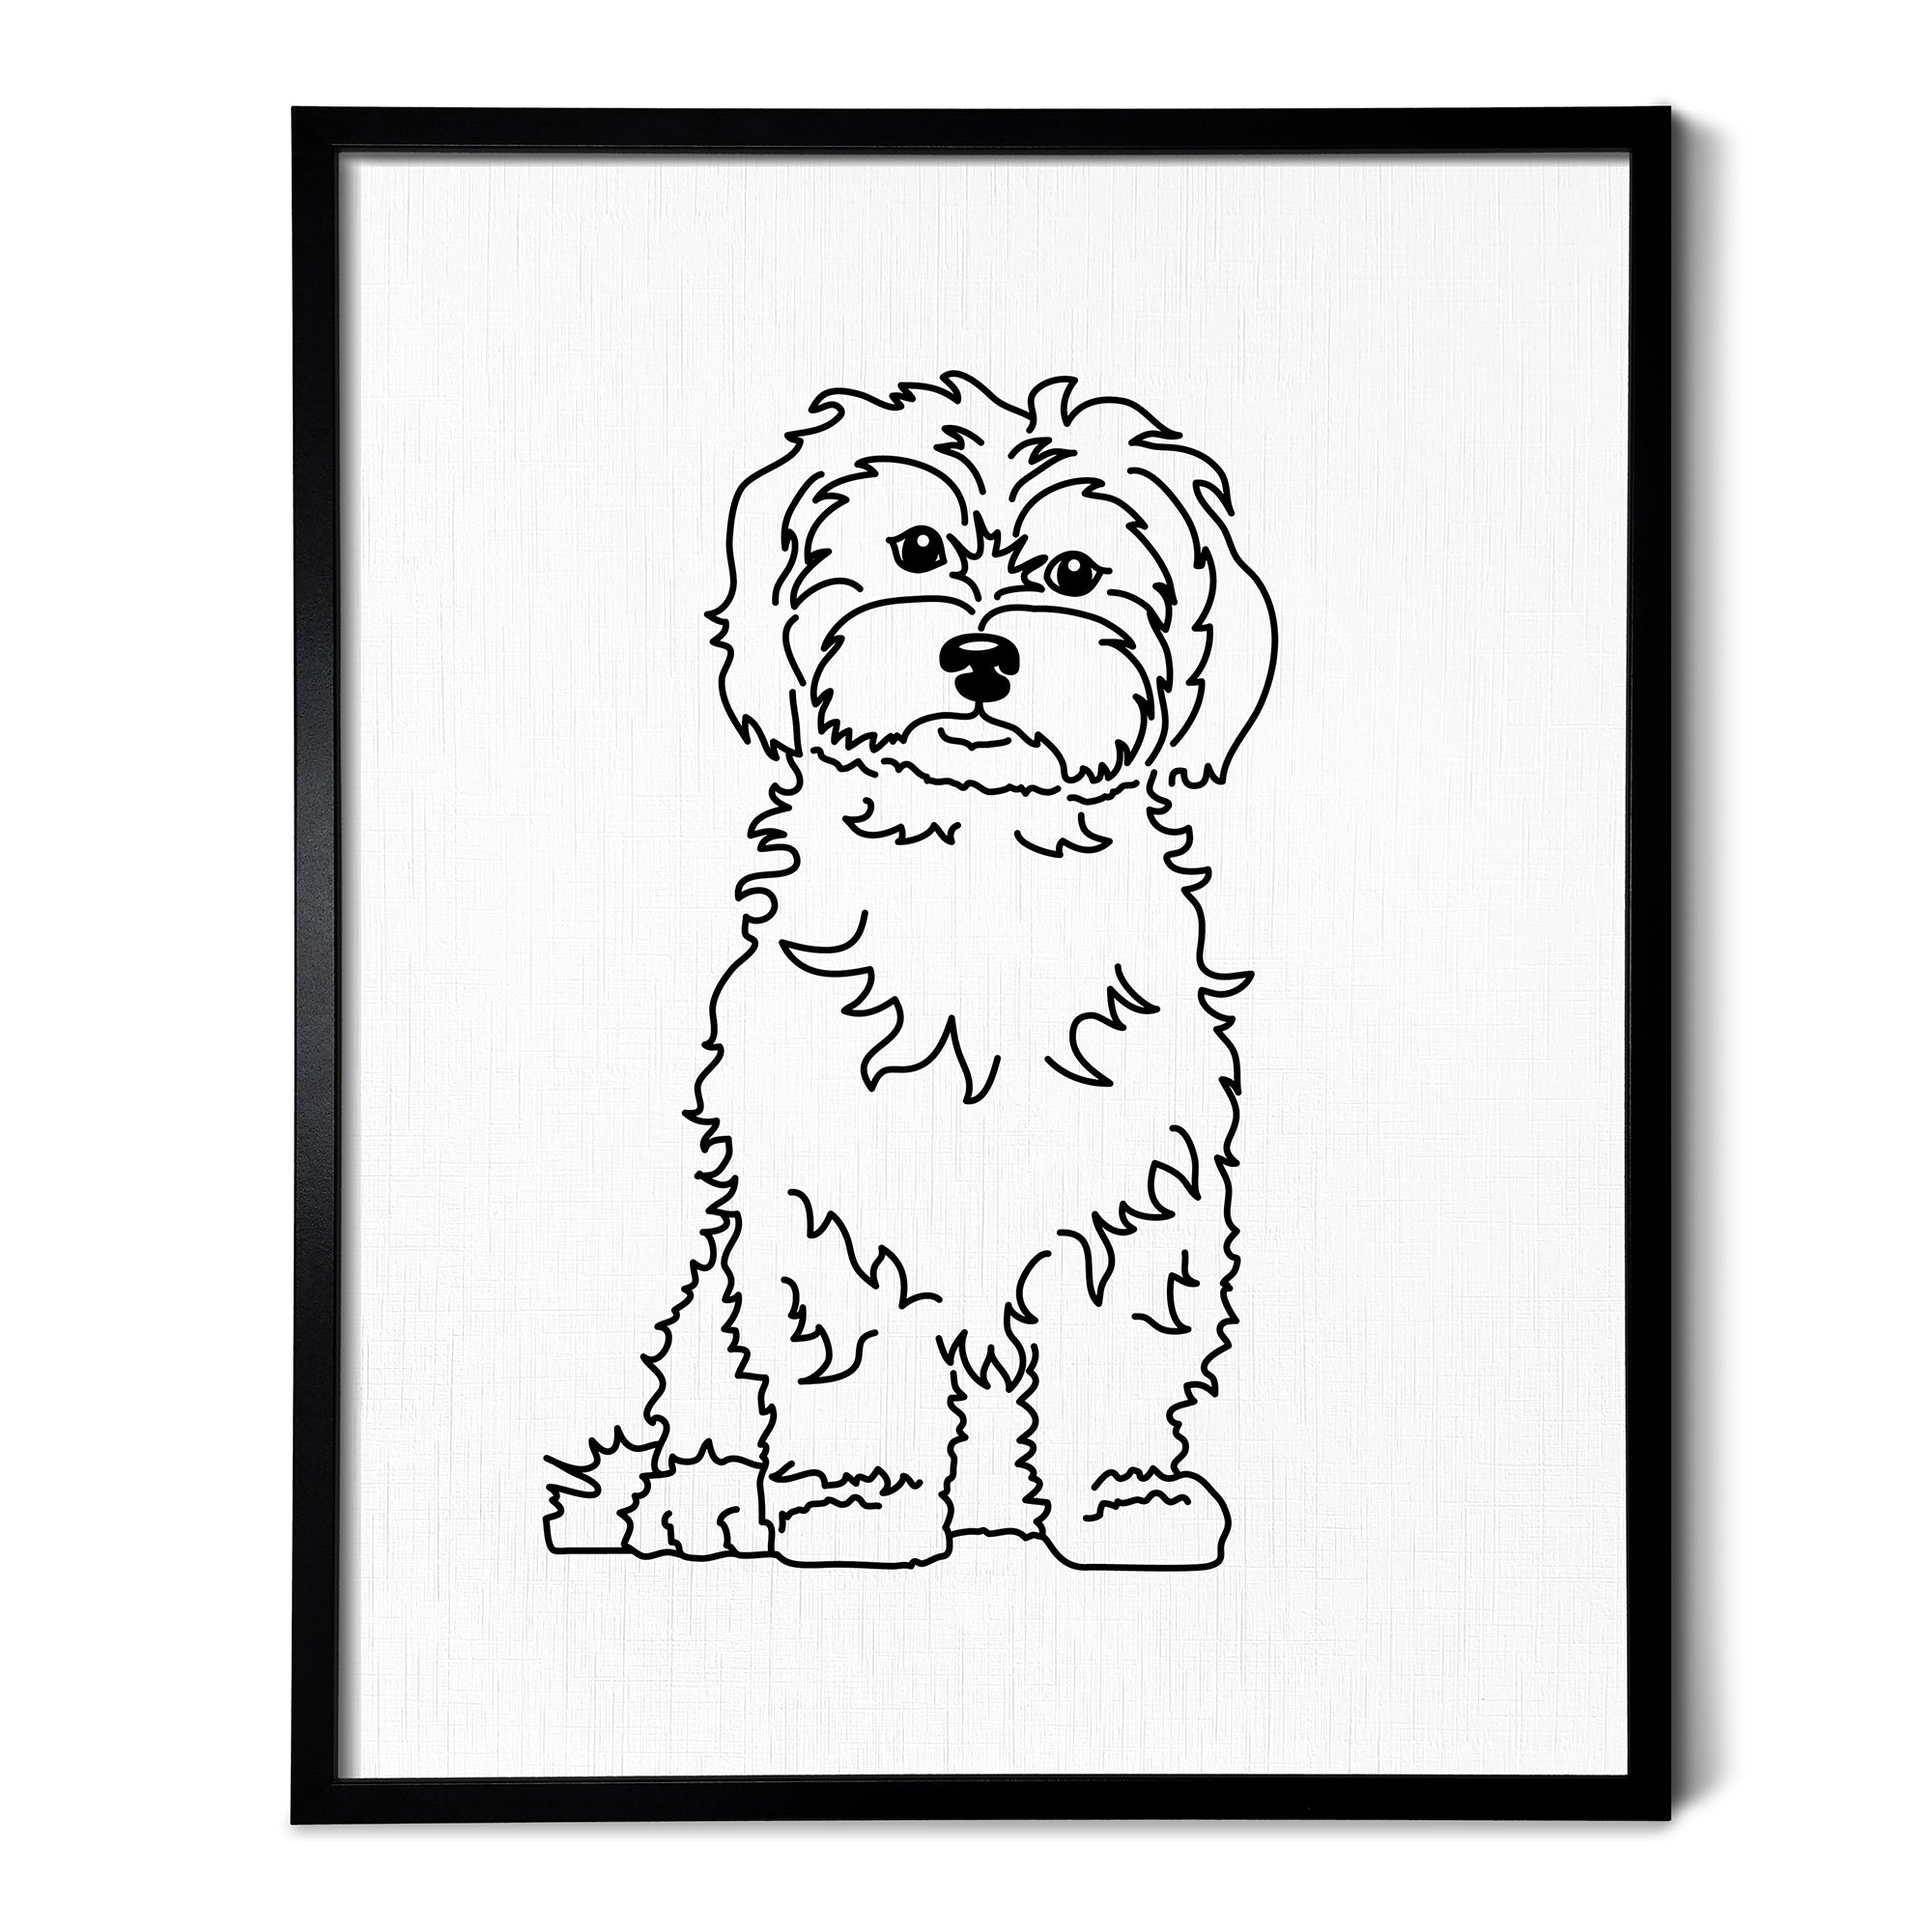 A line art drawing of a Maltese dog on white linen paper in a thin black picture frame